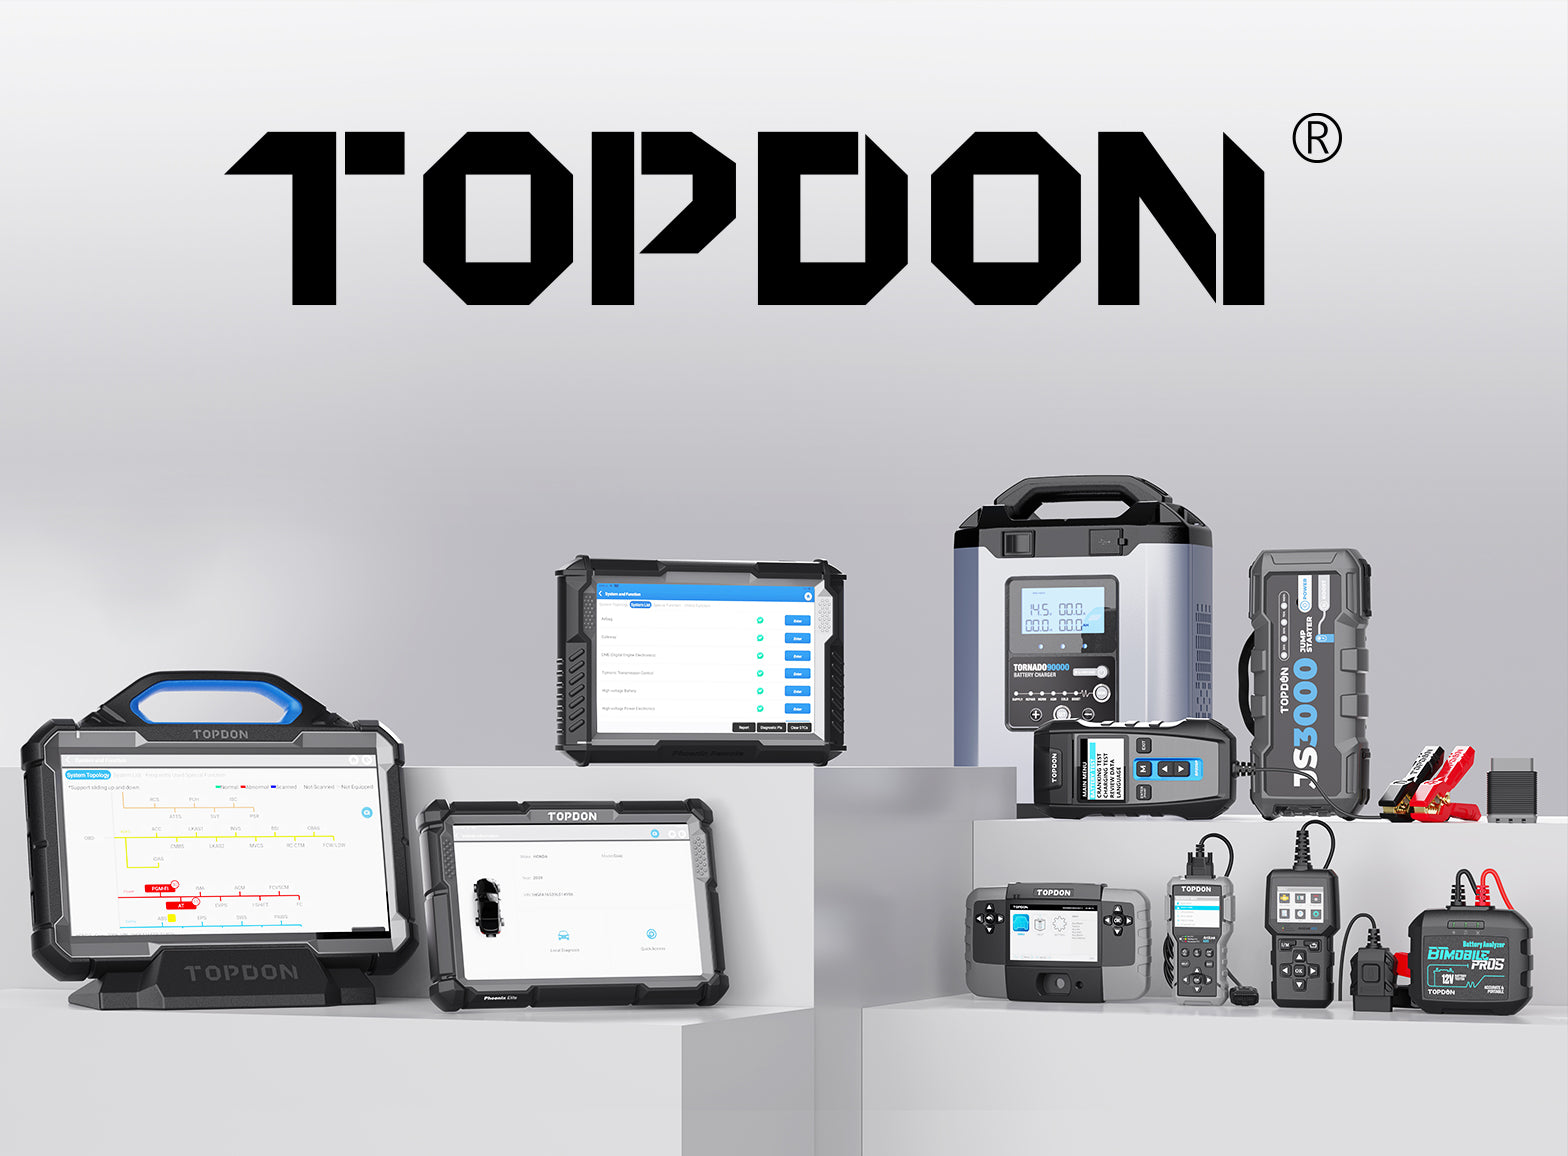 TOPDON makes repair jobs easy. Whether you are a professional, DIY gearhead or beginner, you can leverage TOPDON’s expertise. TOPDON cares about supporting customers through the entire repair process, from initial diagnosis to final solution. 